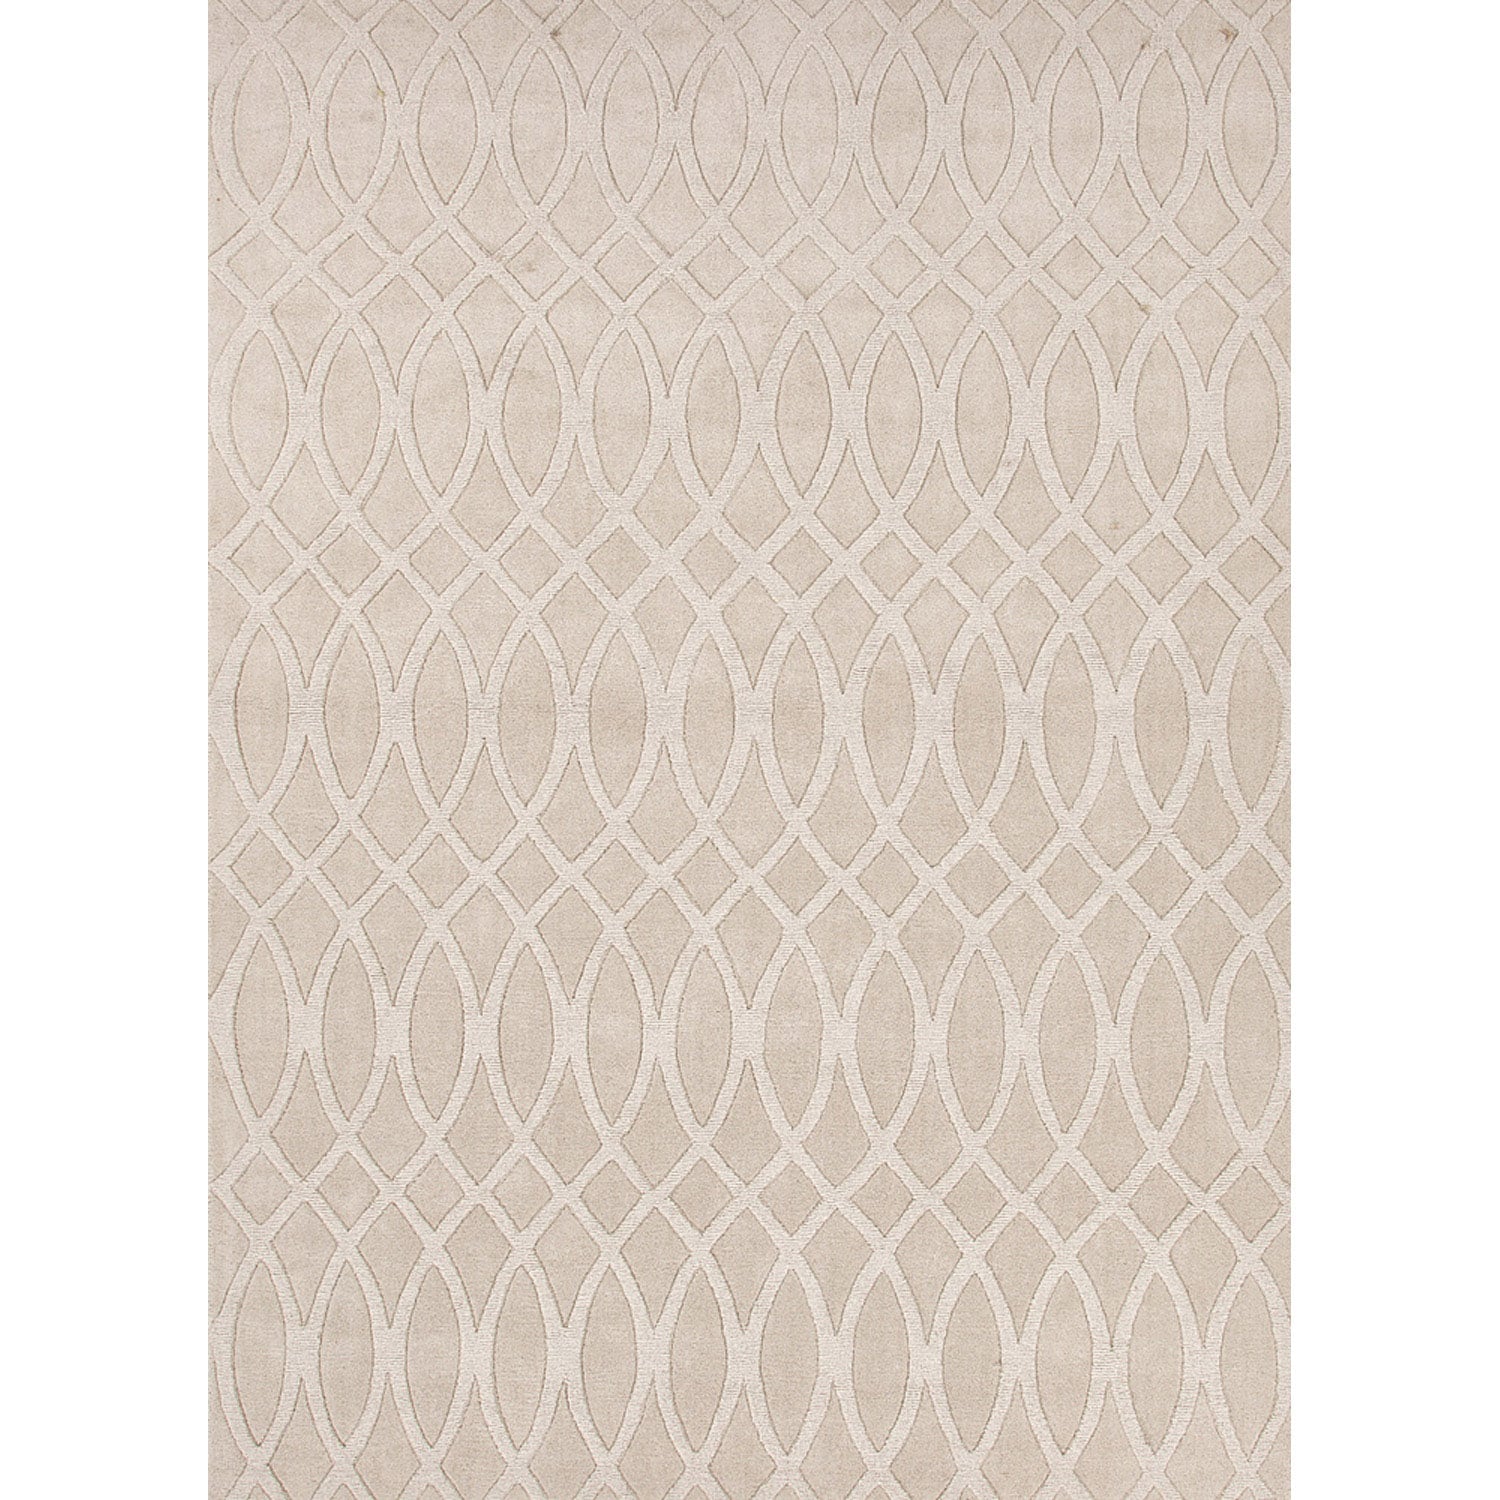 Hand woven Solids Solid Pattern Ivory Rug (8 X 11)